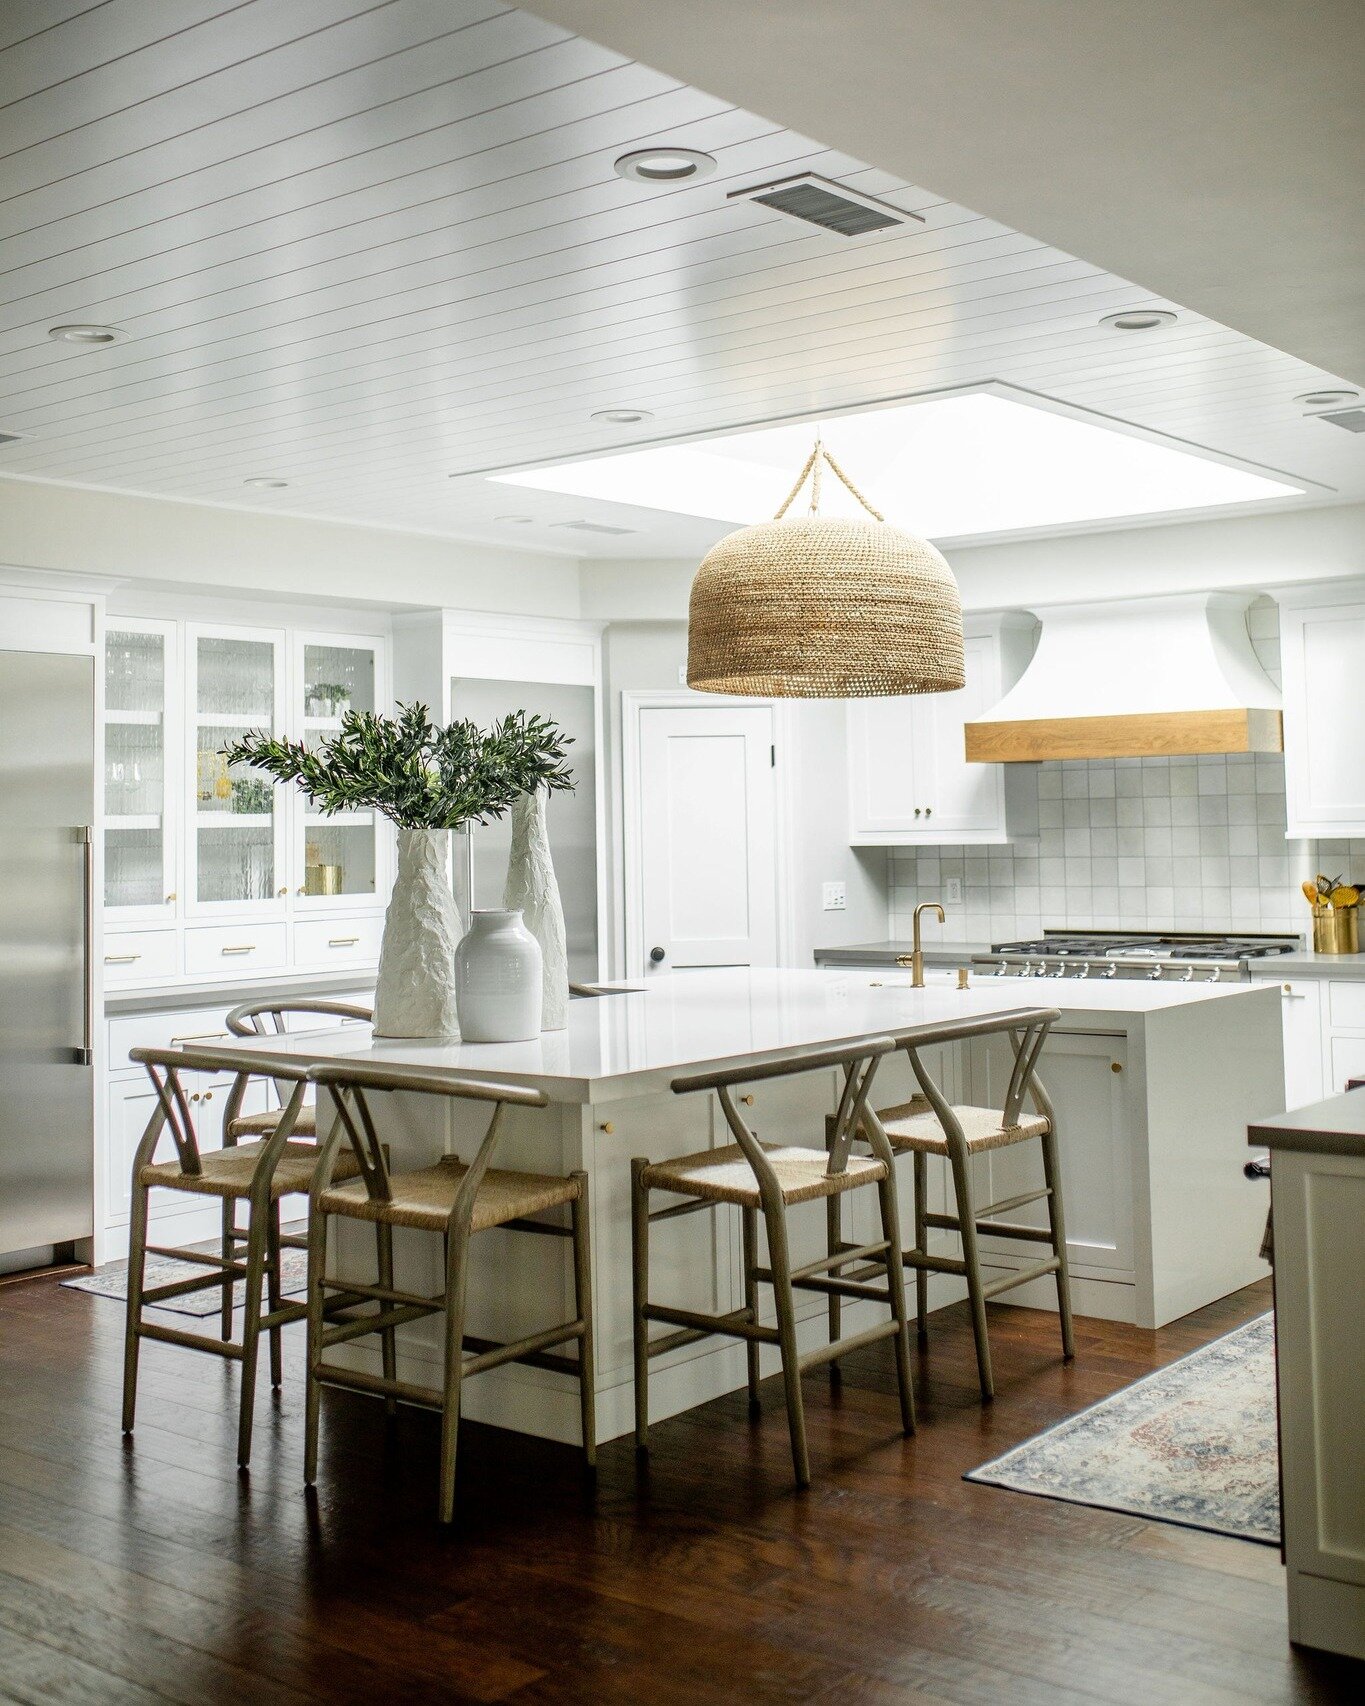 Sunlight streams through the skylight, casting a warm glow on this pristine white kitchen designed by Gracious Living. Clean lines and natural textures create an elegant and calming atmosphere, perfect for culinary creativity. Imagine hosting unforge